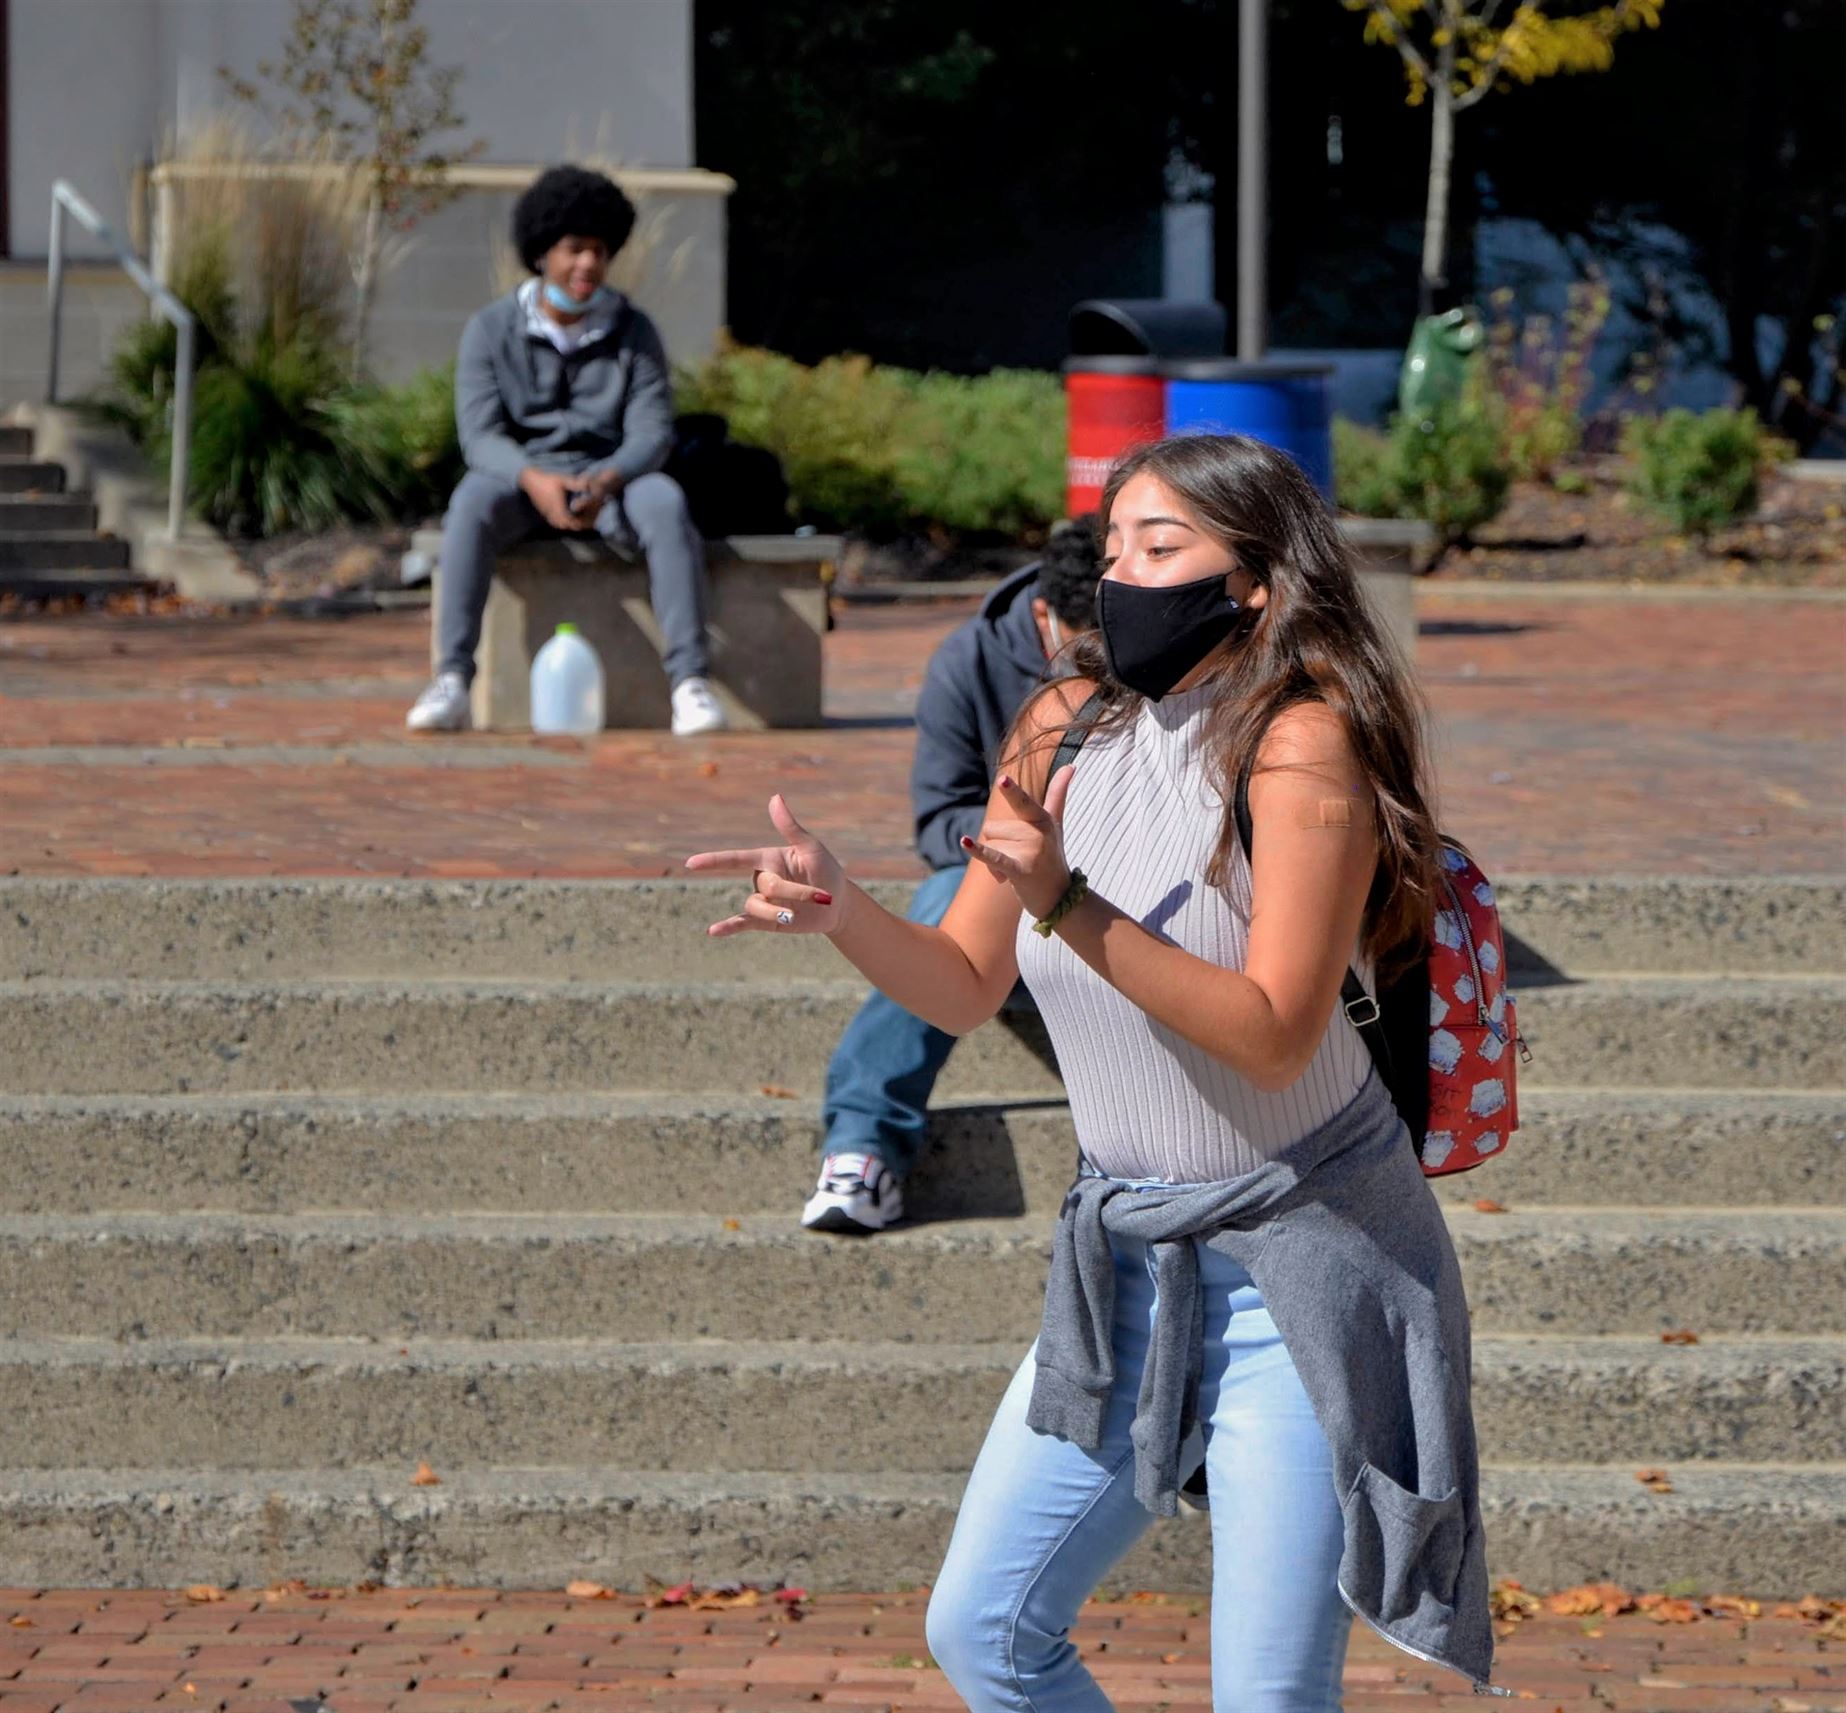 A Montclair State student dances to the beat of the DJ's music in the Student Center Quad during the University Day festivities on Oct. 14, 2020. Photo courtesy of John LaRosa